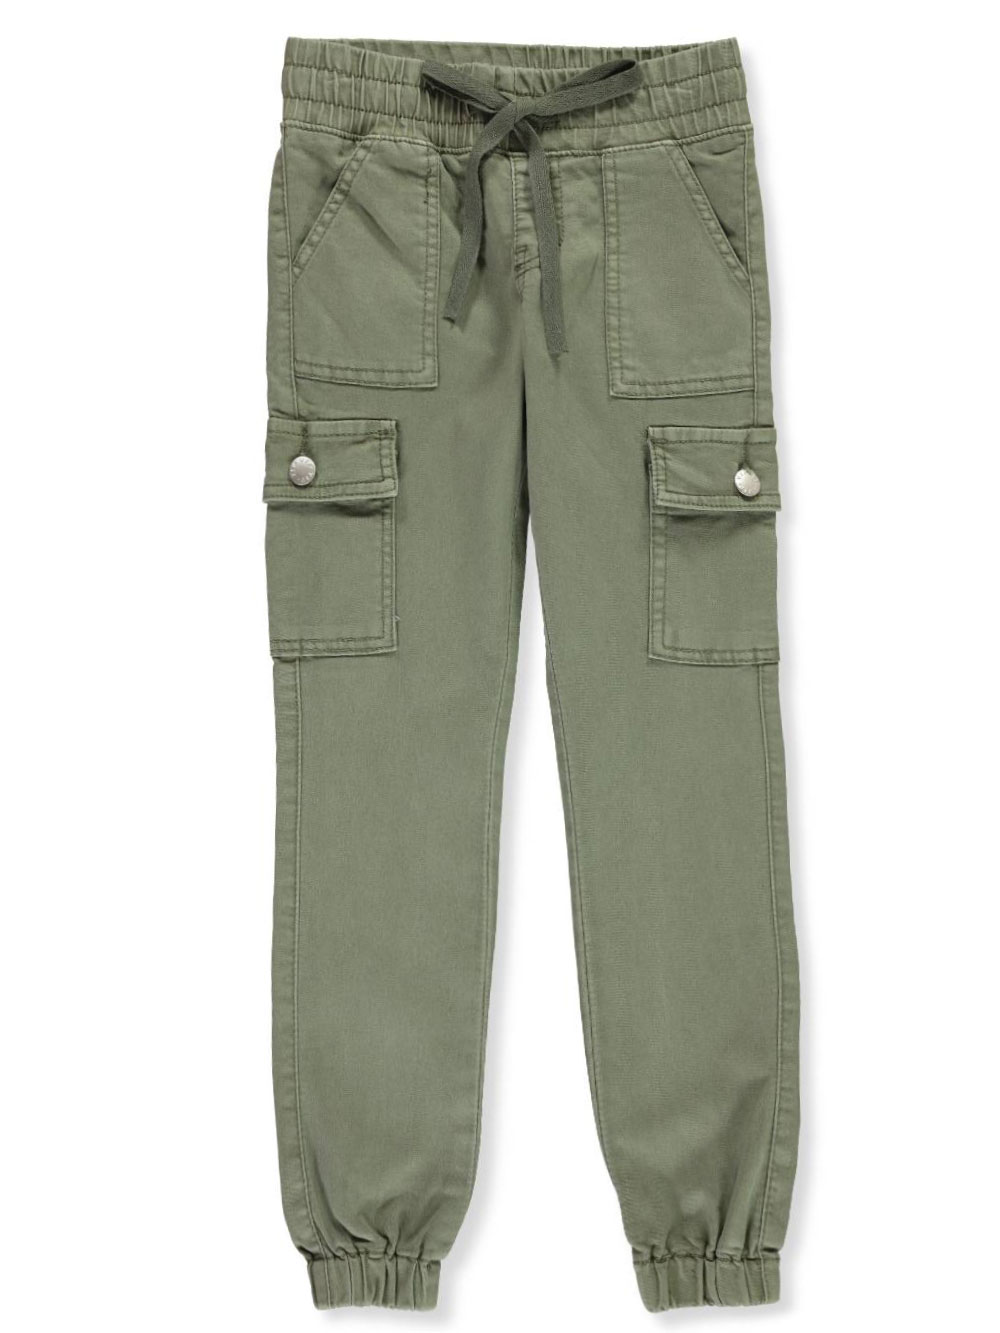 vip jeans colored jogger pants